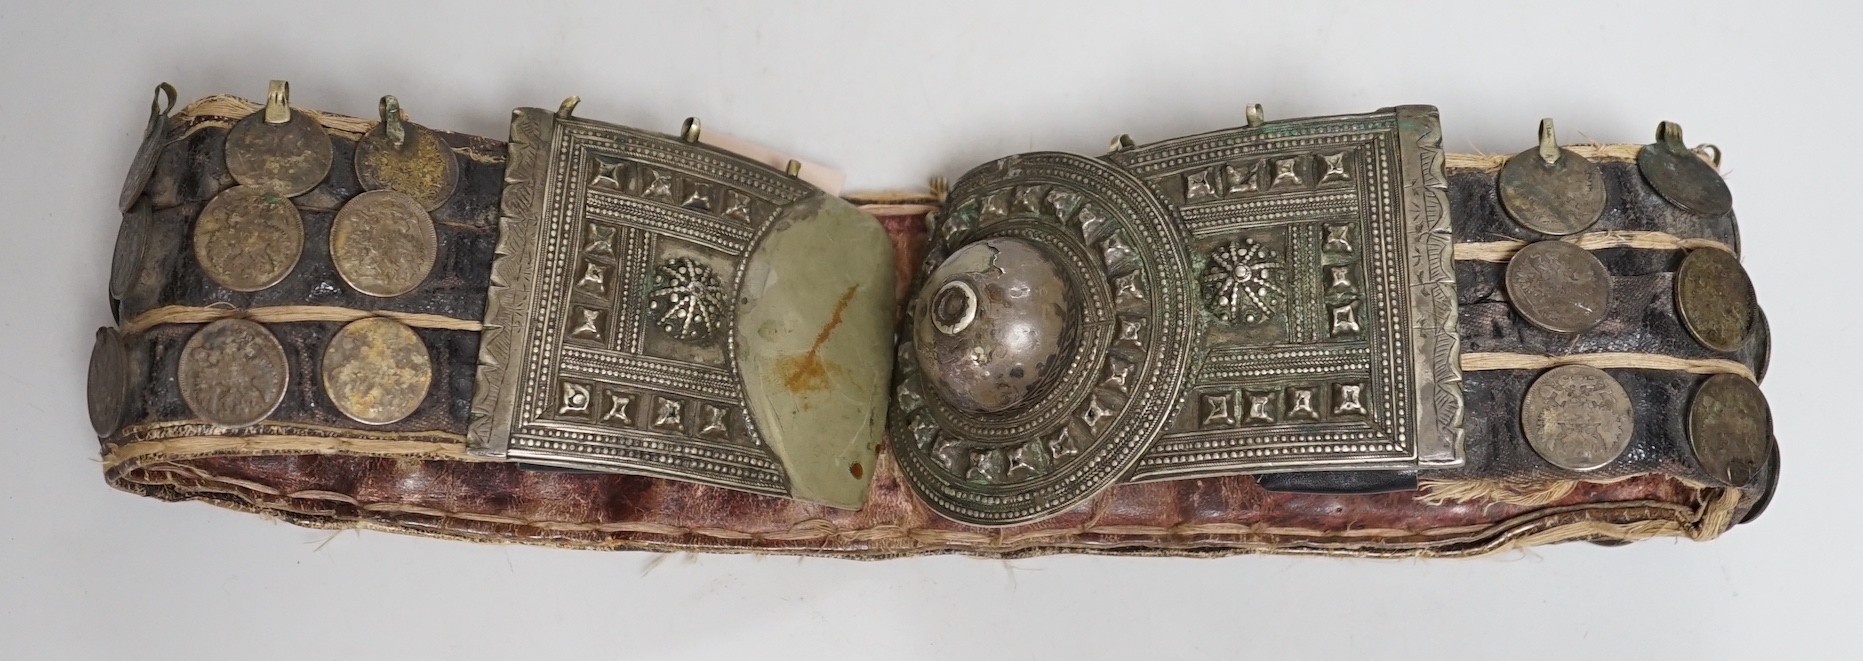 A 19th century Afghan belt, Russian coin mounted